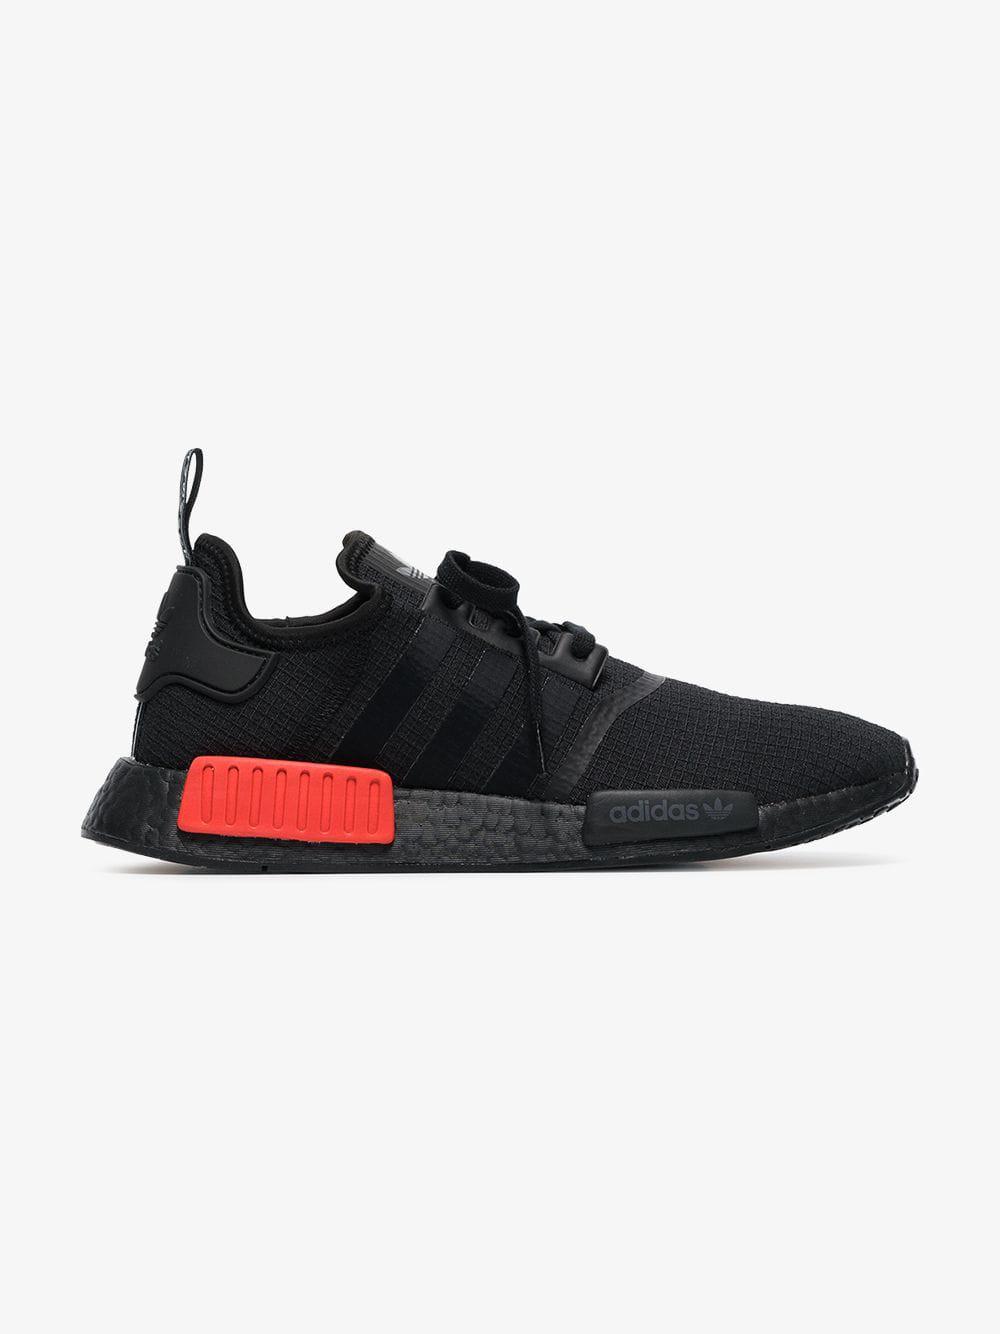 adidas Synthetic Black And Red Nmd R1 Sneakers for Men - Lyst